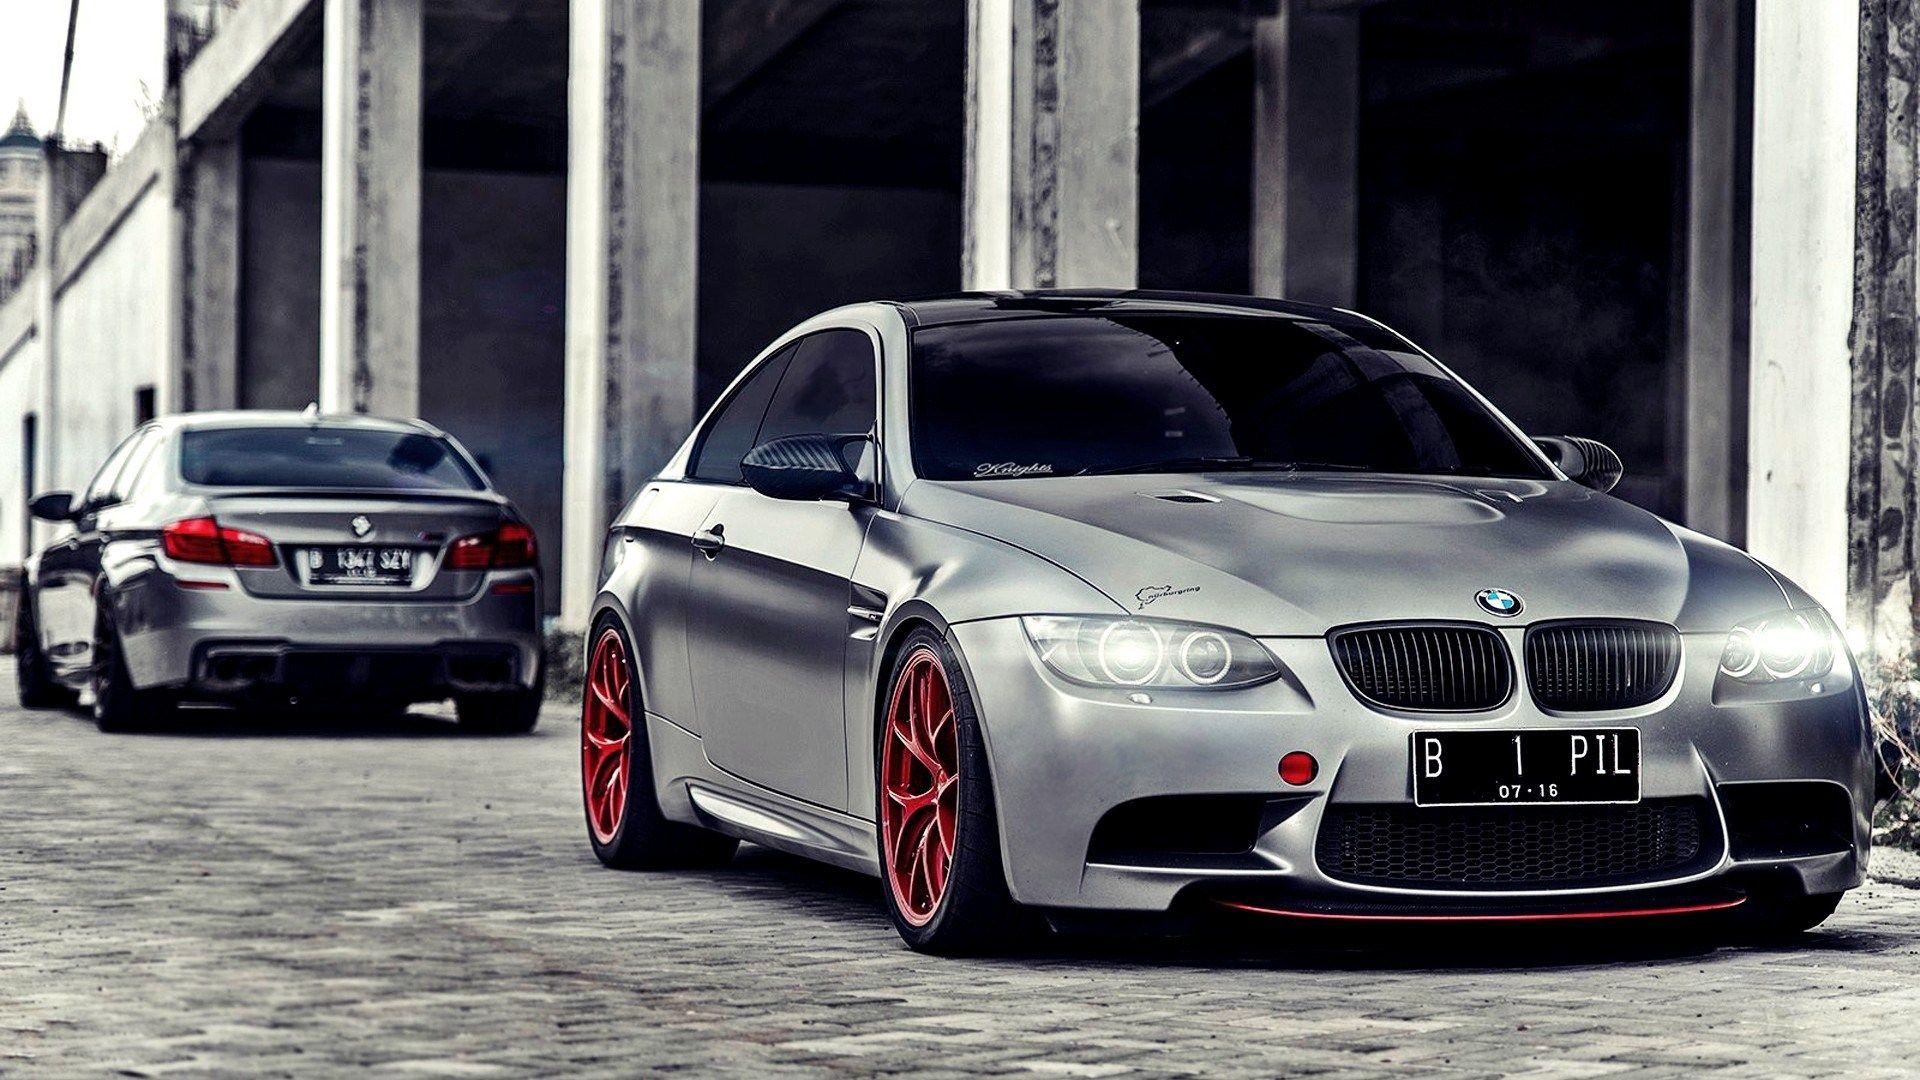 BMW M5 Full HD Wallpaper and Background Imagex1080